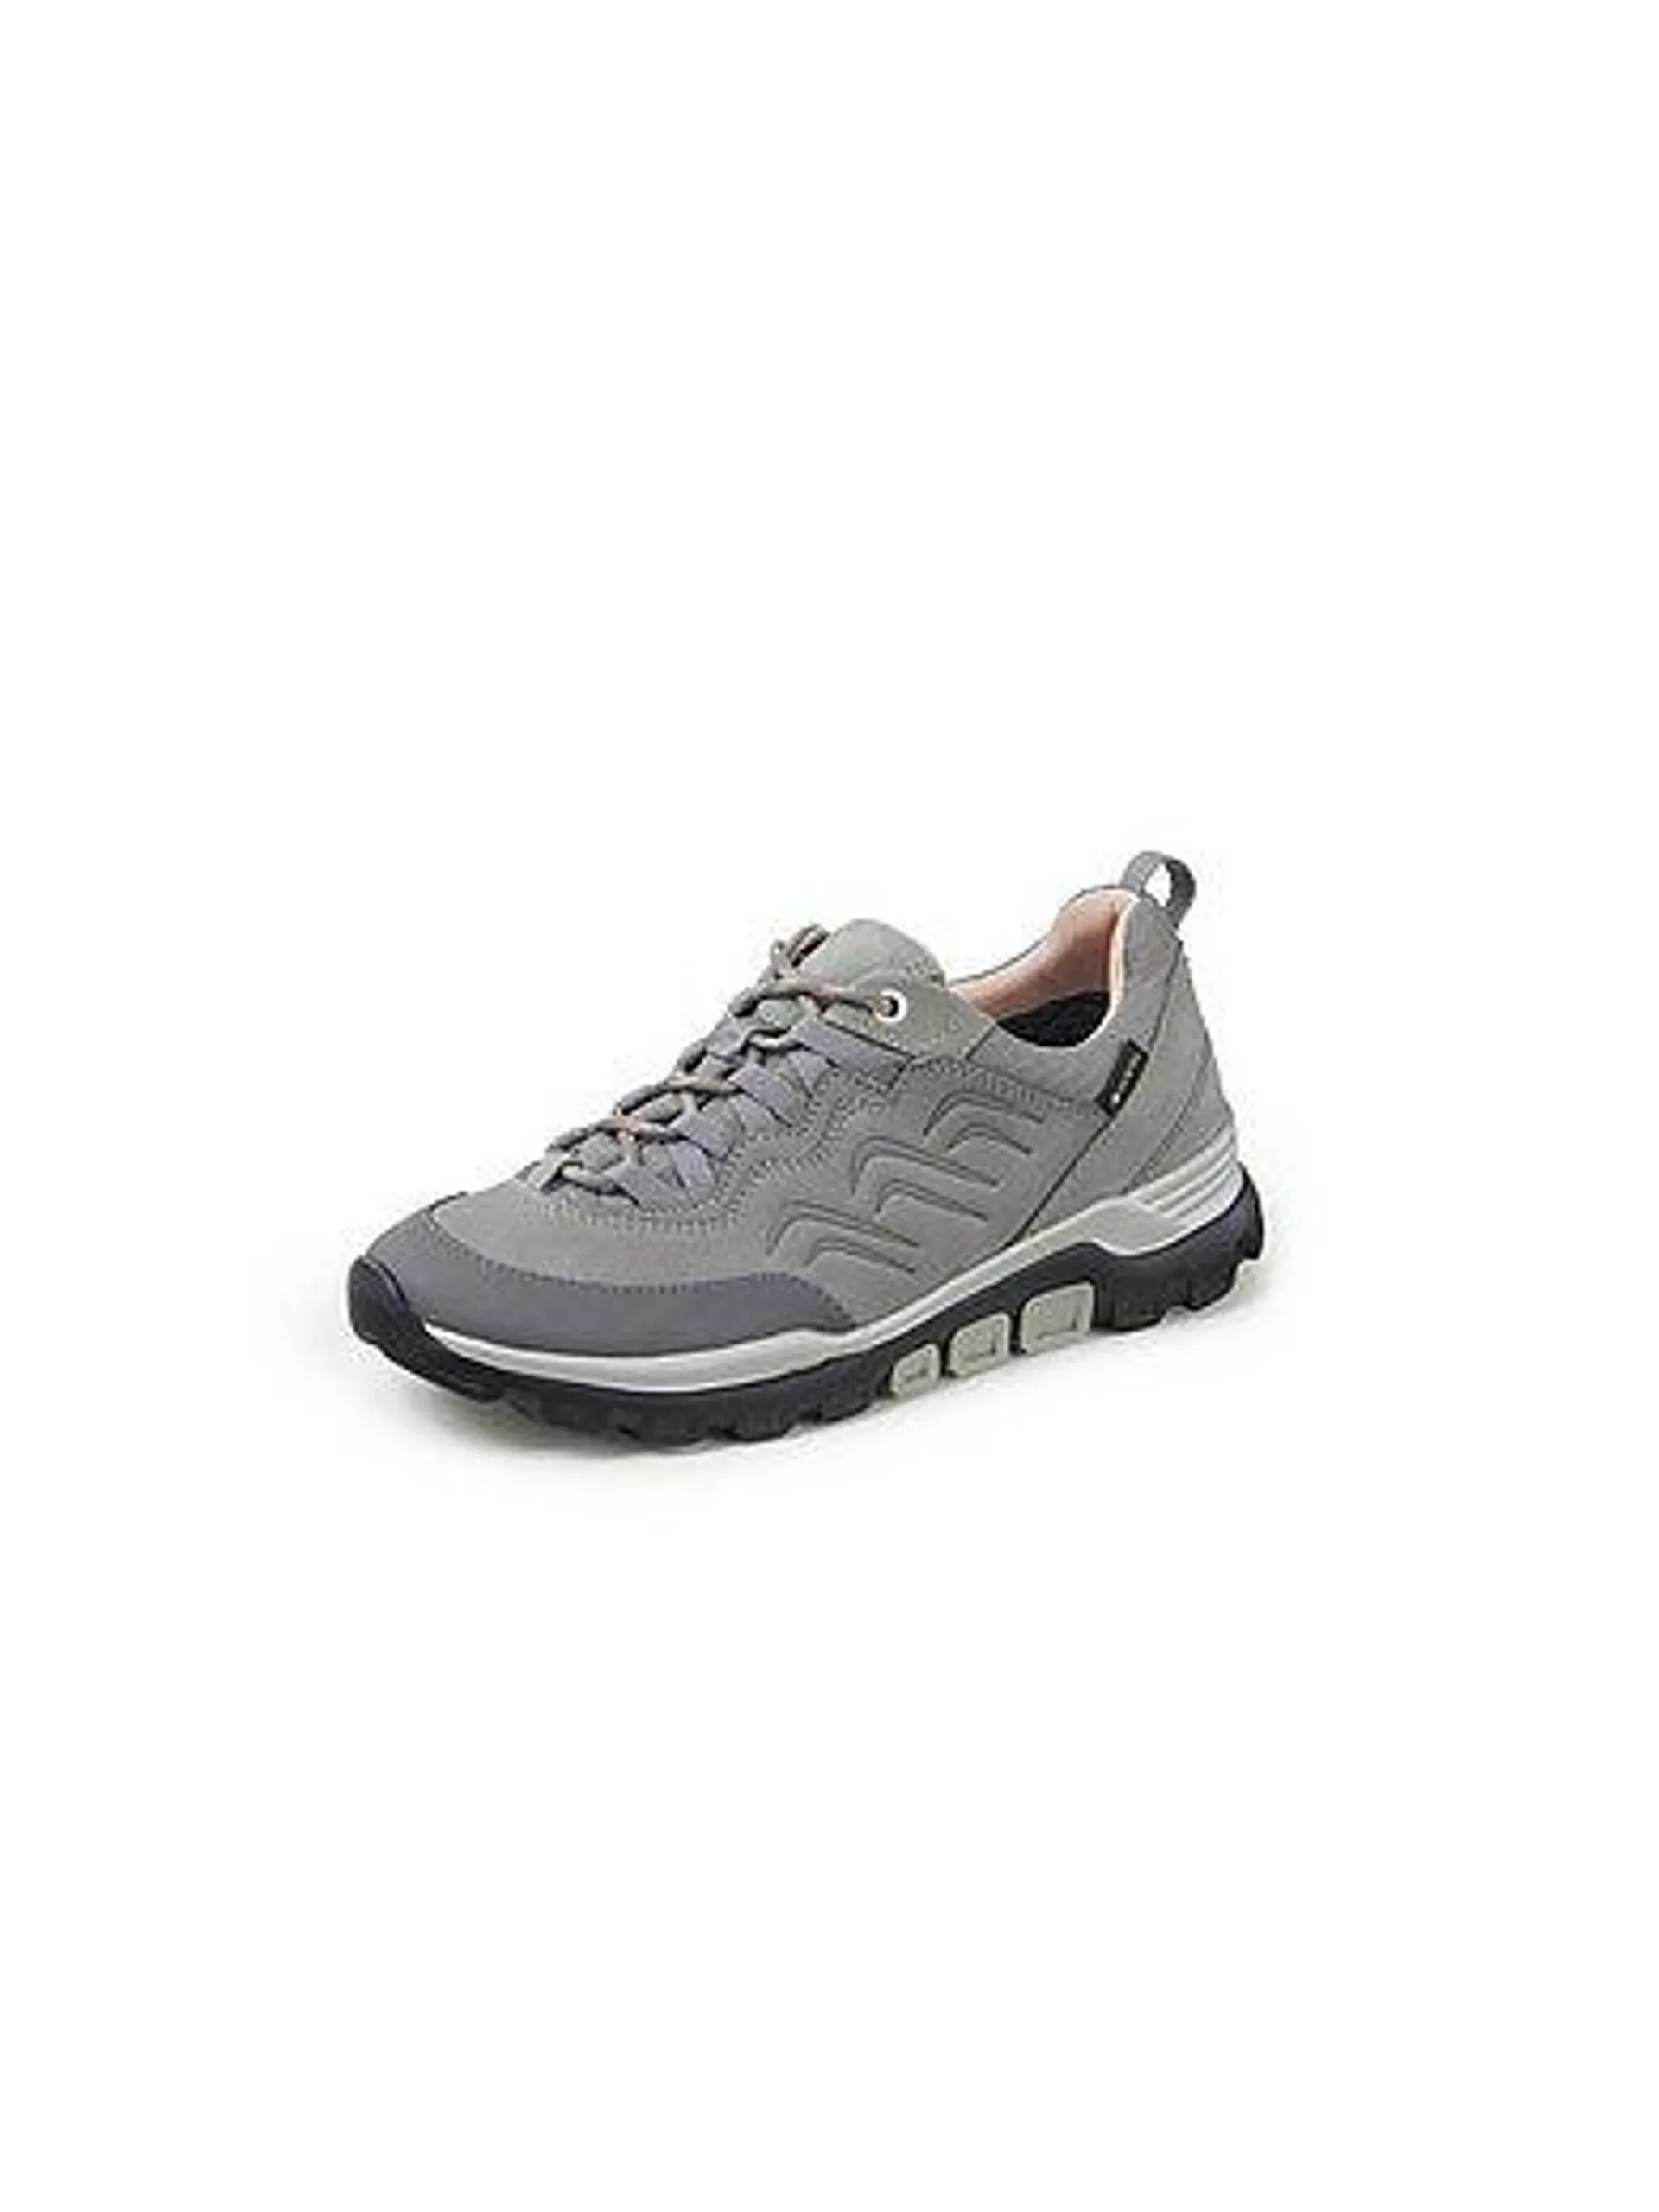 Waterproof hiking shoes with Gore-Tex finish